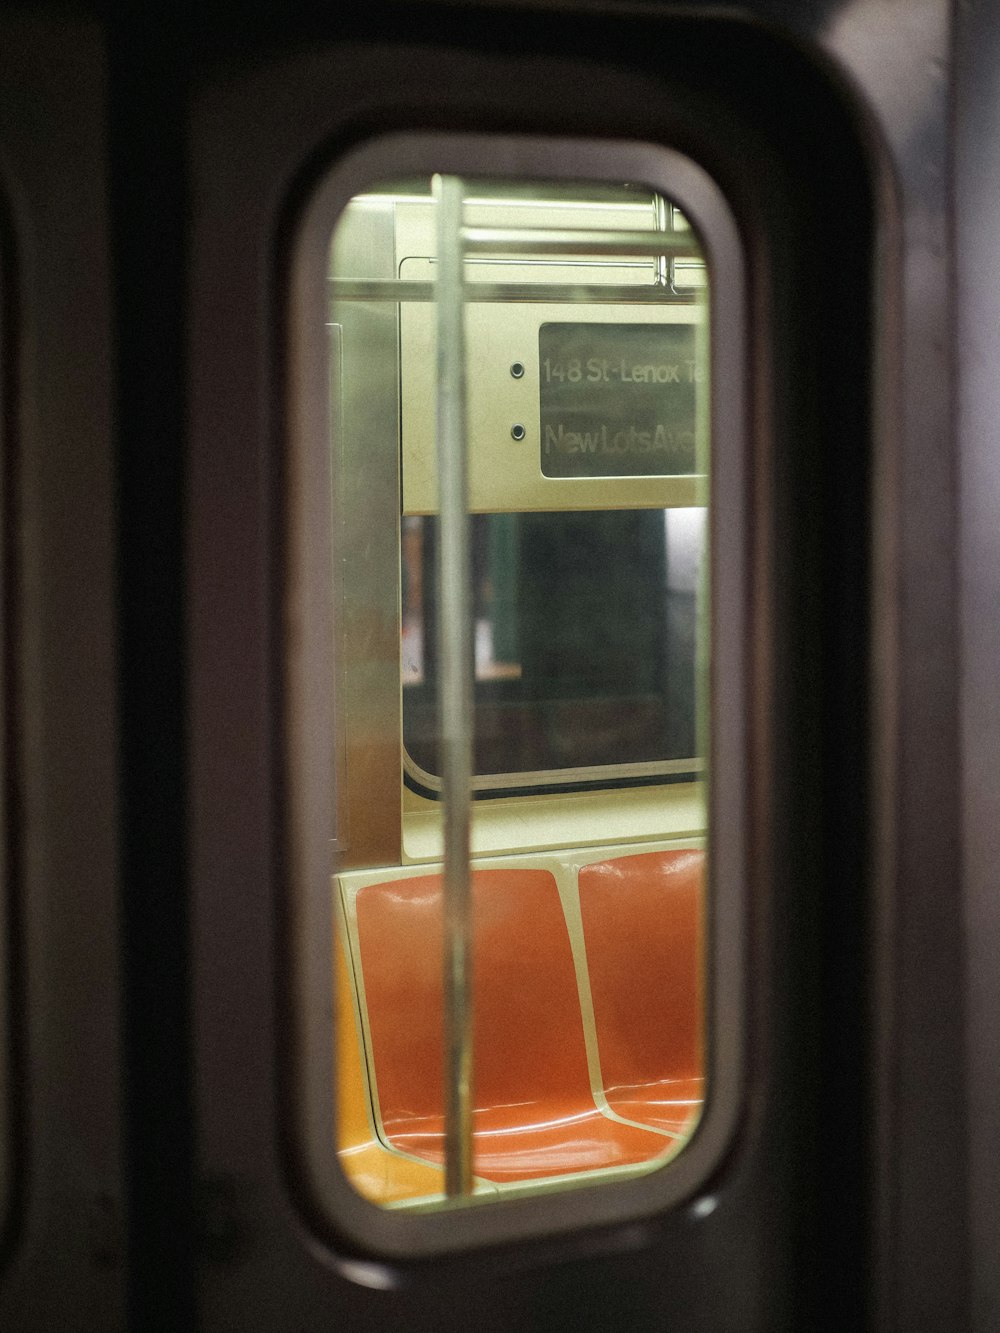 a view of the inside of a subway car through a window